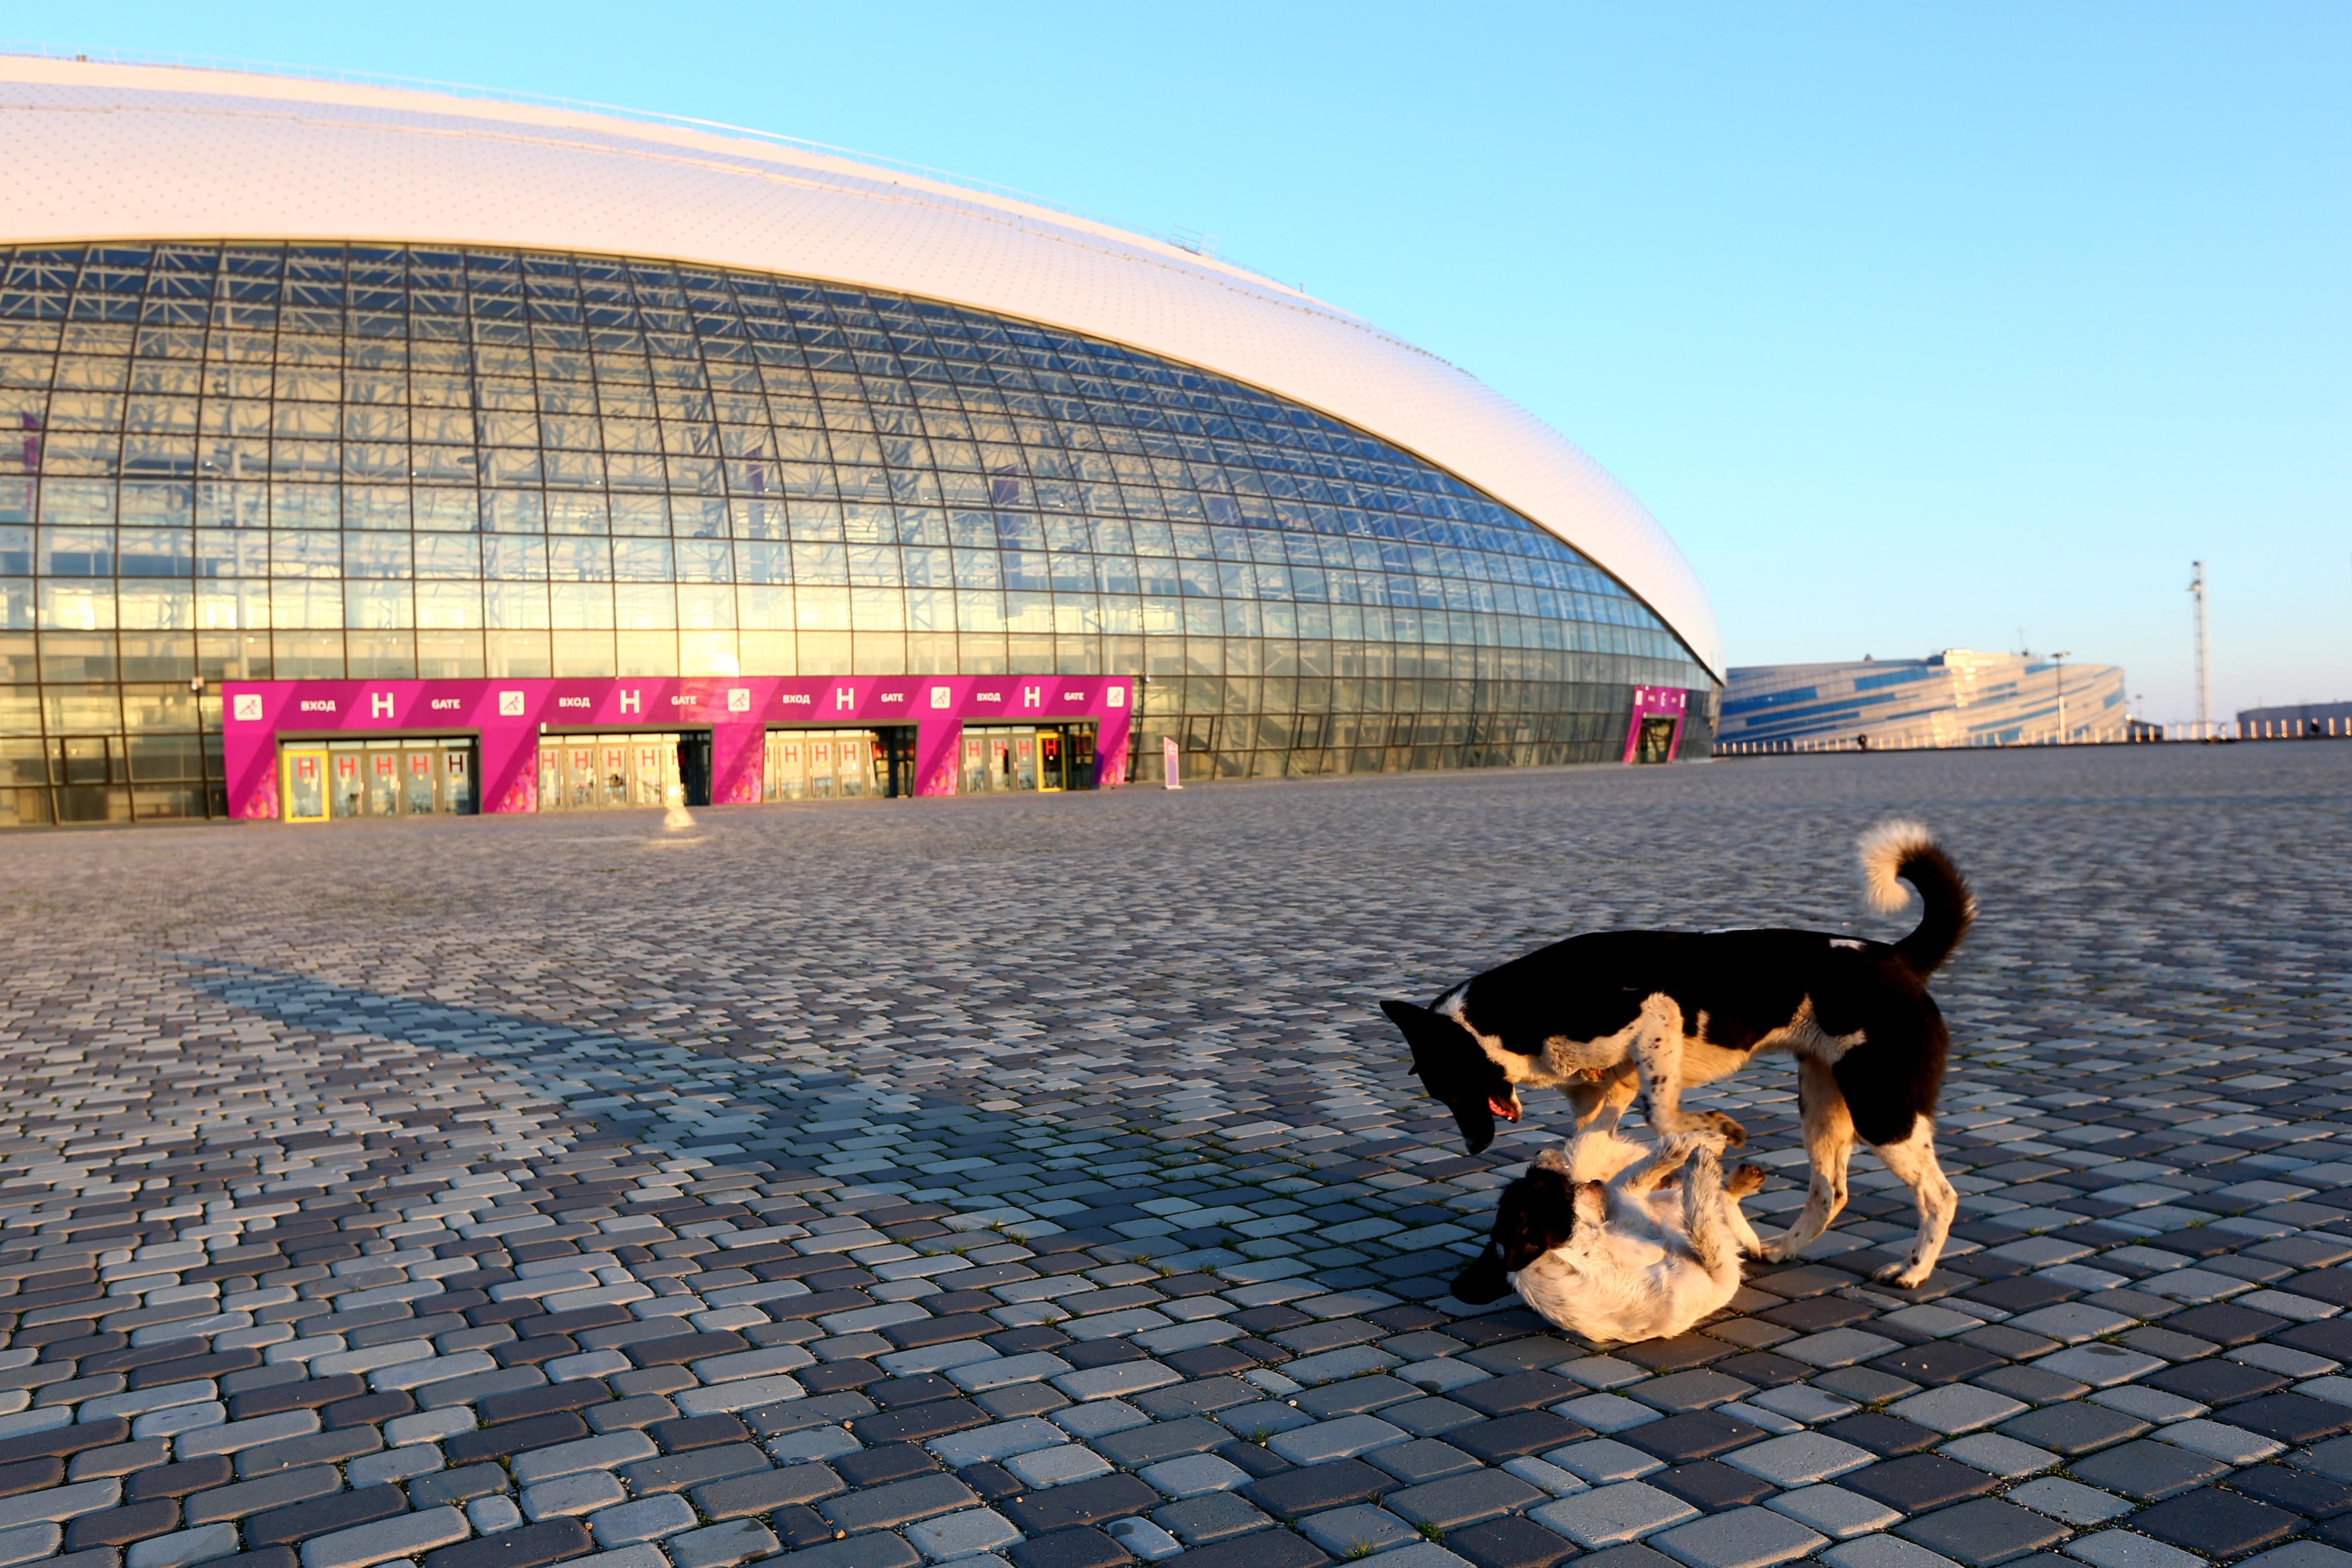 SOCHI, RUSSIA - FEBRUARY 02:  Stray dogs wrestle outside the Bolshoy Ice Dome ahead of the Sochi 2014 Winter Olympics at the Olympic Park on February 2, 2014 in Sochi, Russia.  (Photo by Quinn Rooney/Getty Images)